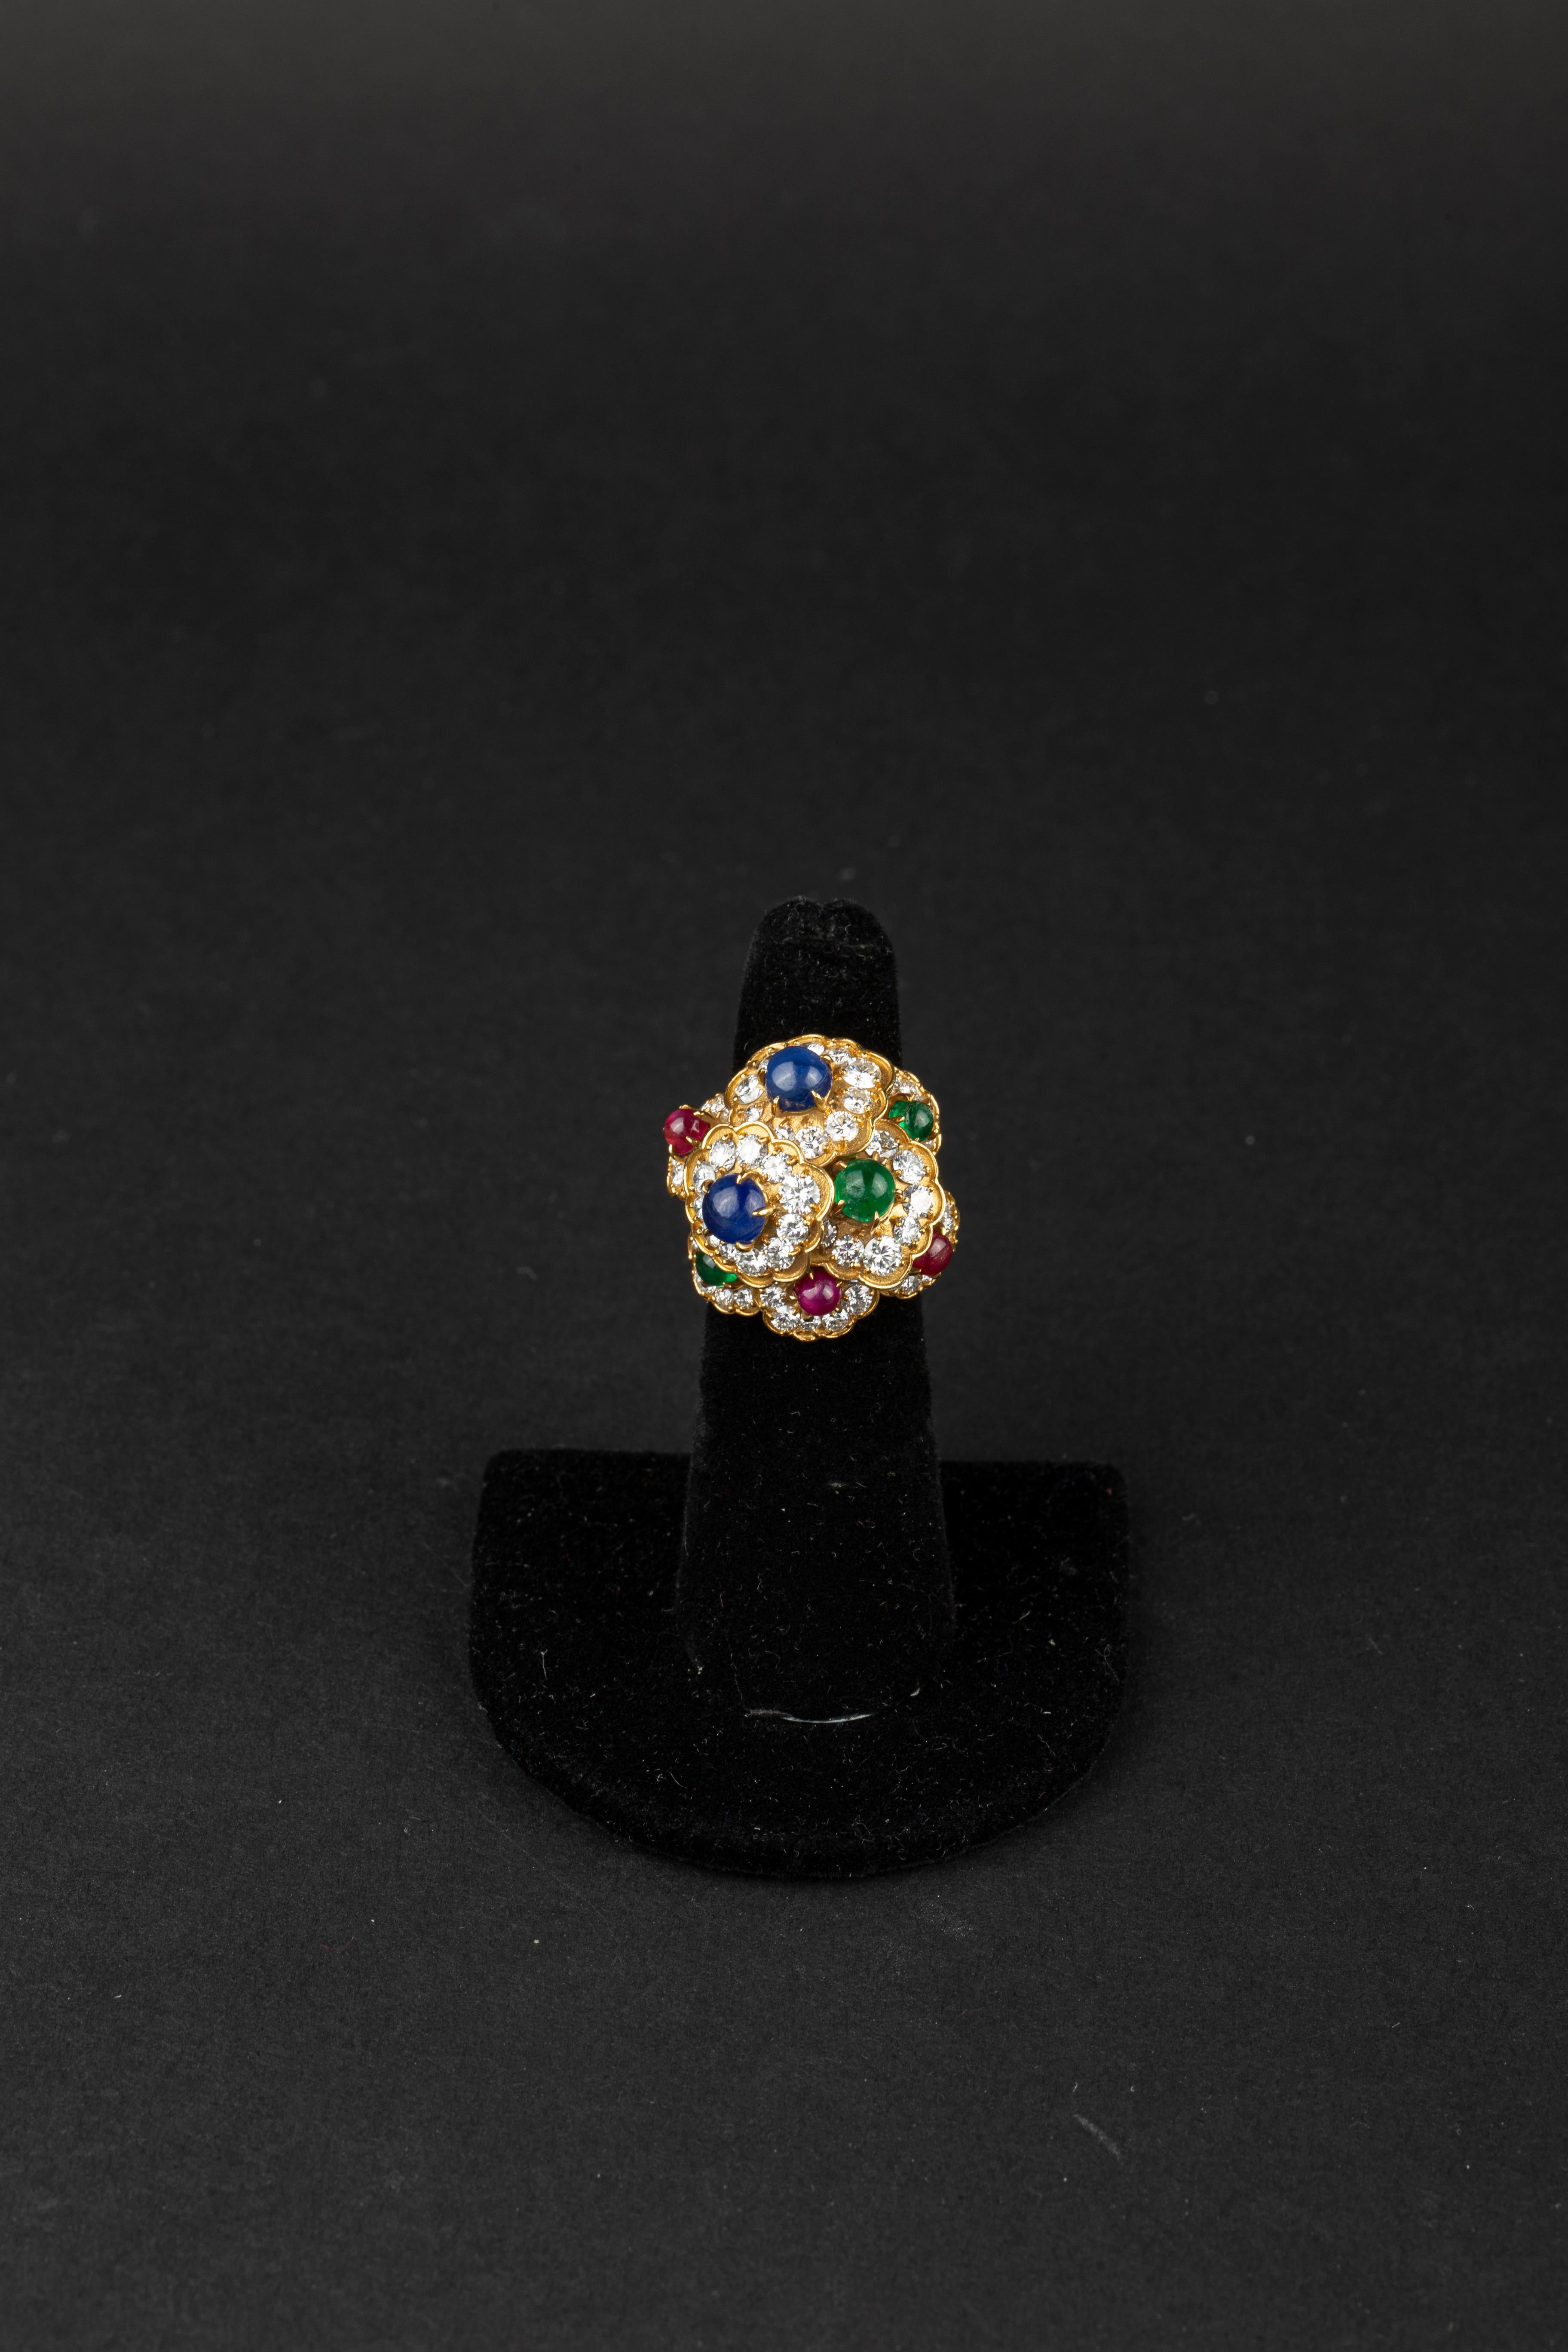 M. Gérard Gold, Cabochon Colored Stone and Diamond Floret Cluster Dome Ring Made in France, circa 1970.
18 kt., 8 round cabochon sapphires, rubies and emeralds, 78 round diamonds ap. 4.60 cts., signed M. Gérard, no. 5.72, with maker's mark and